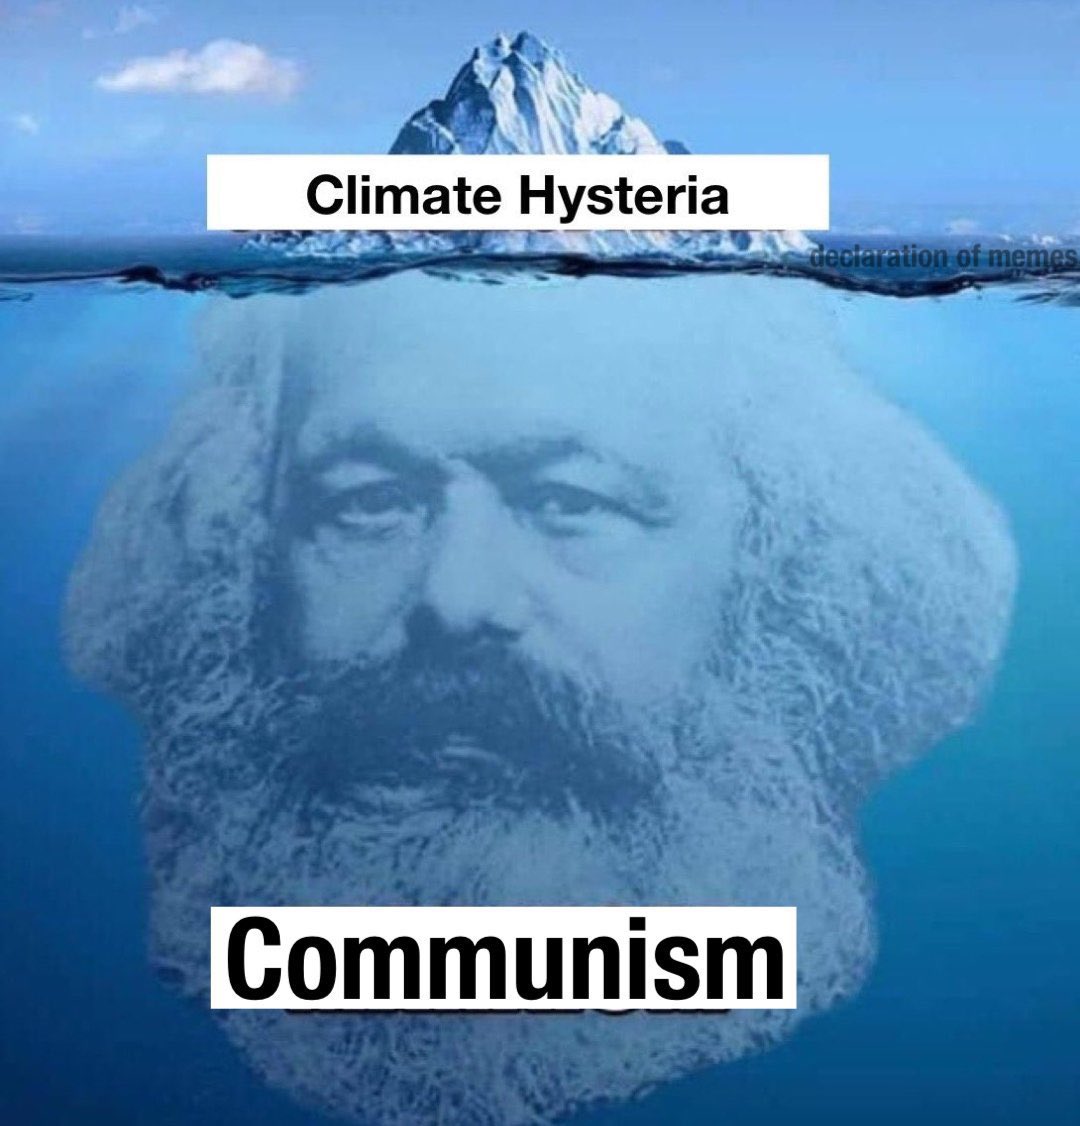 Climate hysteria is a smokescreen for communism. Retweet if you agree.